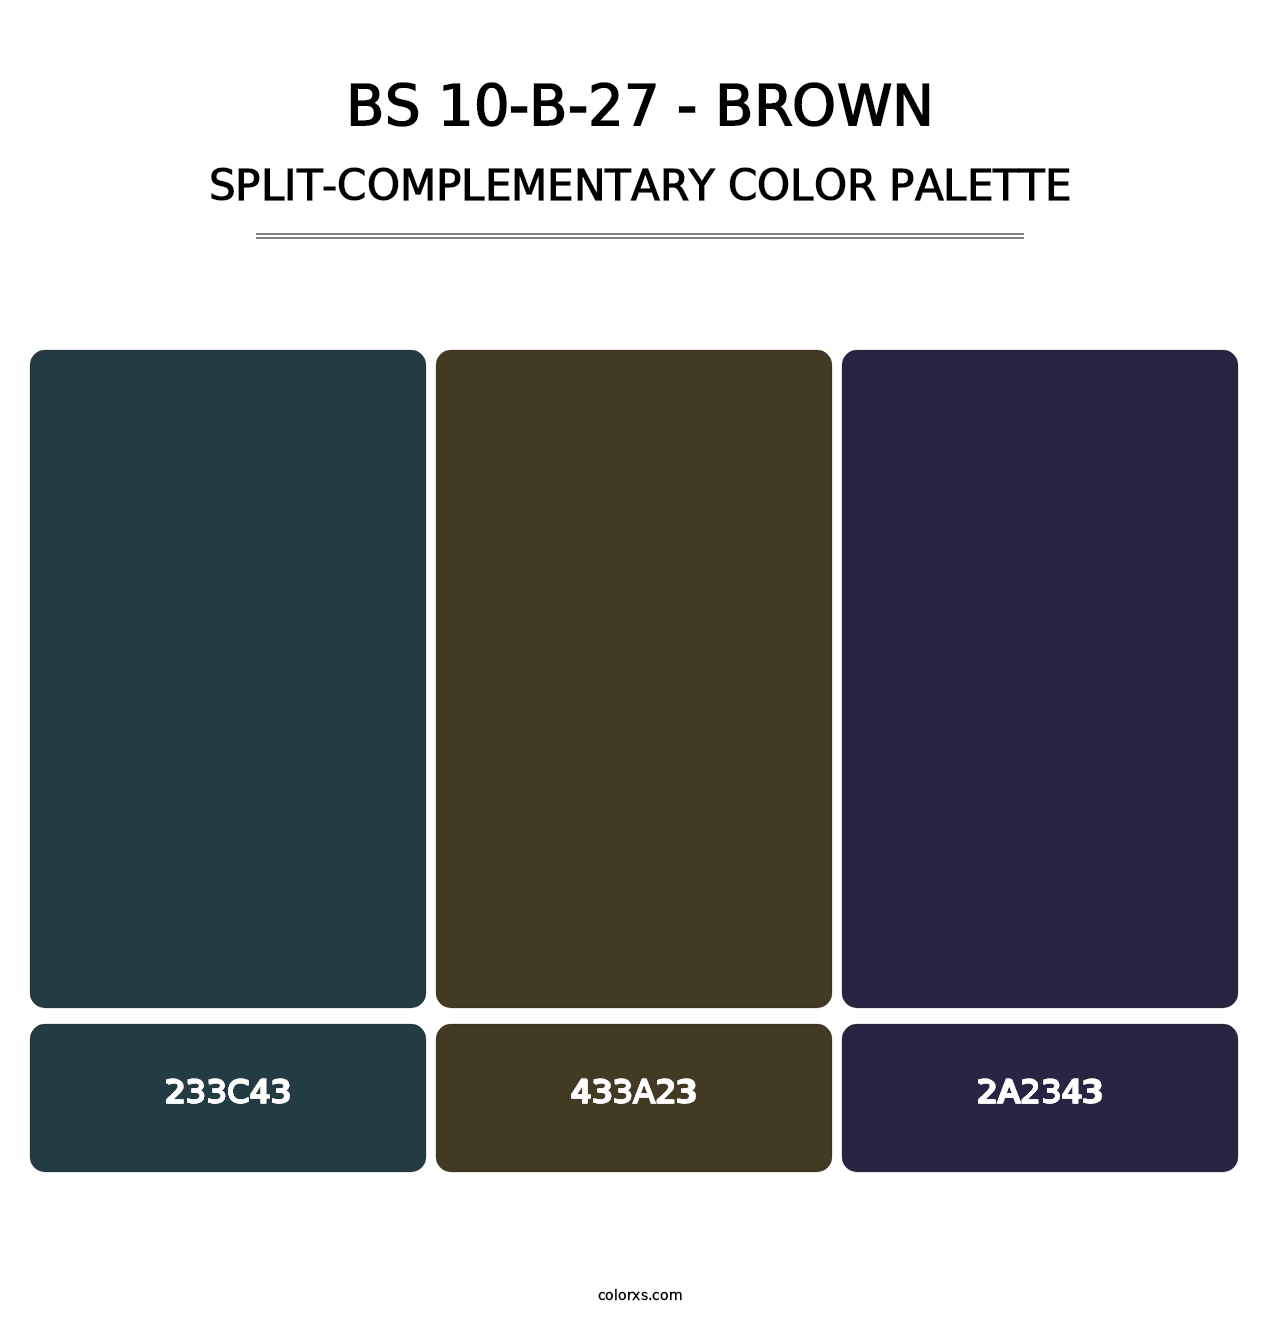 BS 10-B-27 - Brown - Split-Complementary Color Palette